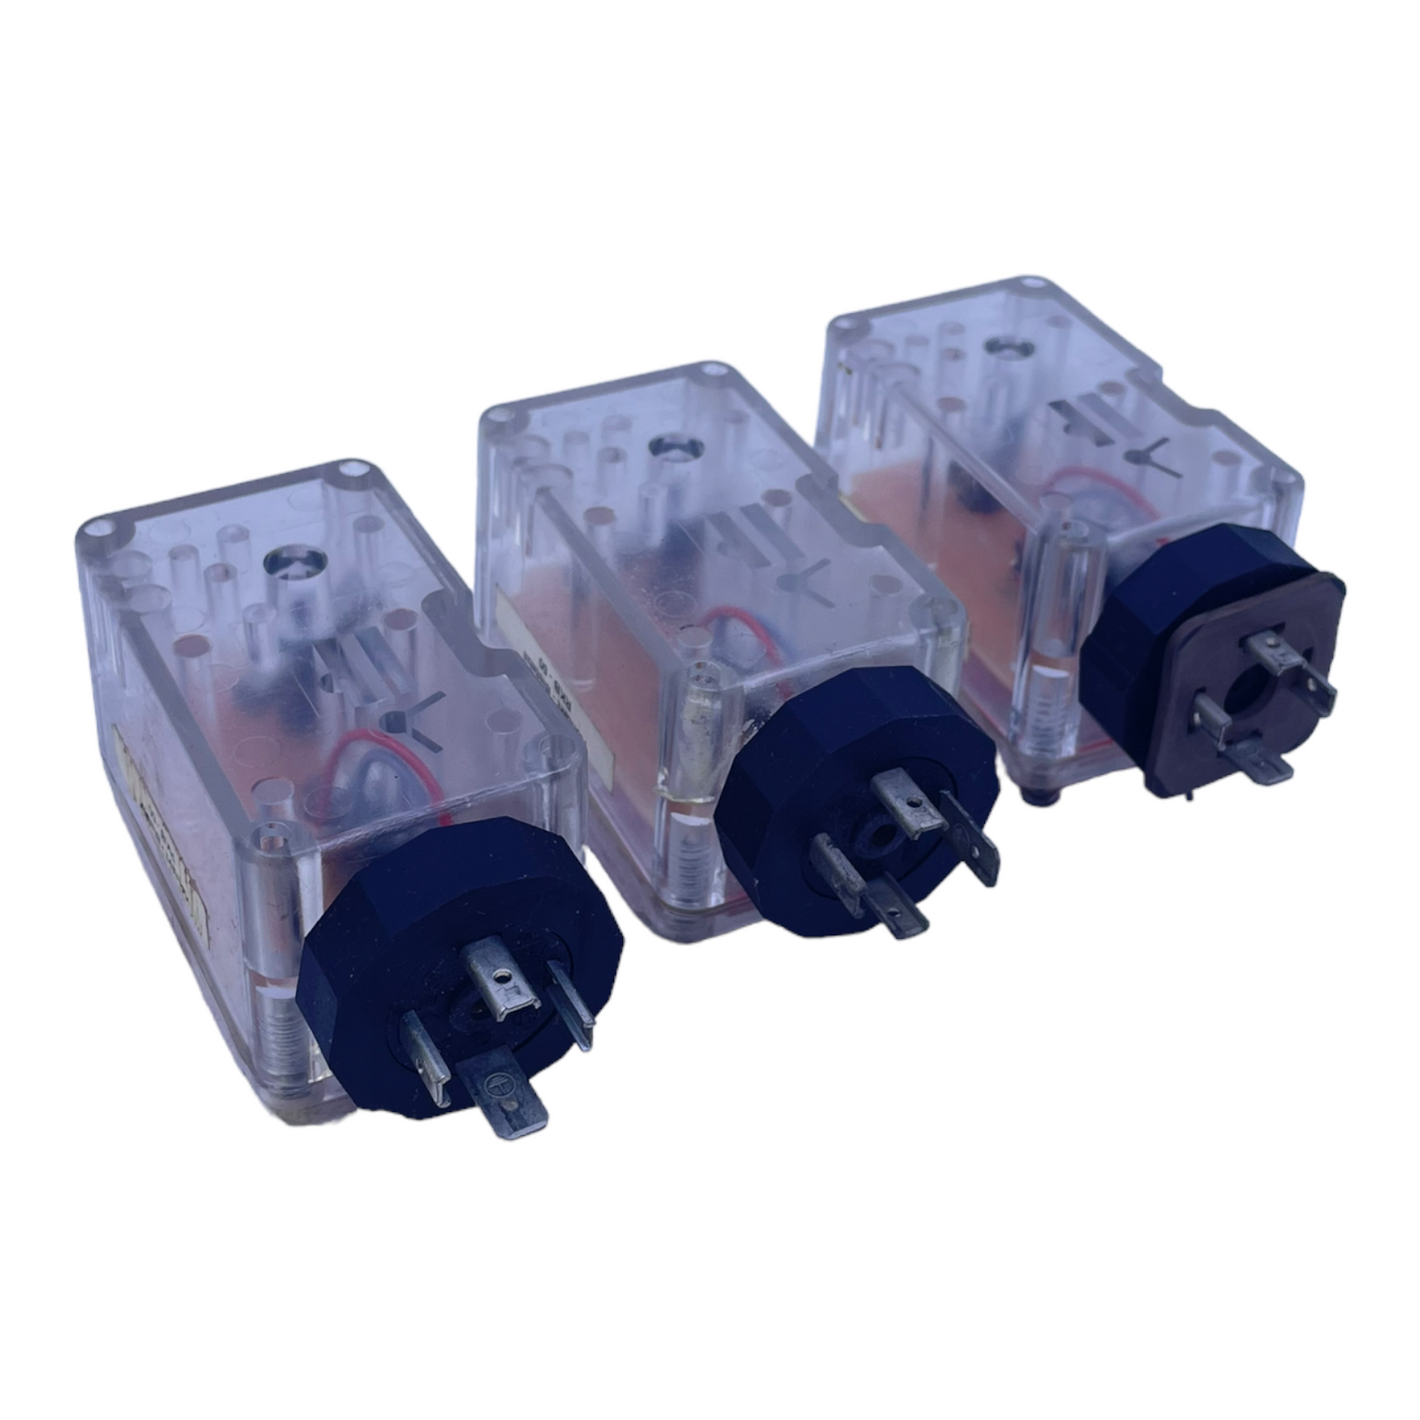 RKB 4-250V-1mA-3A contact module pack: 3 pieces